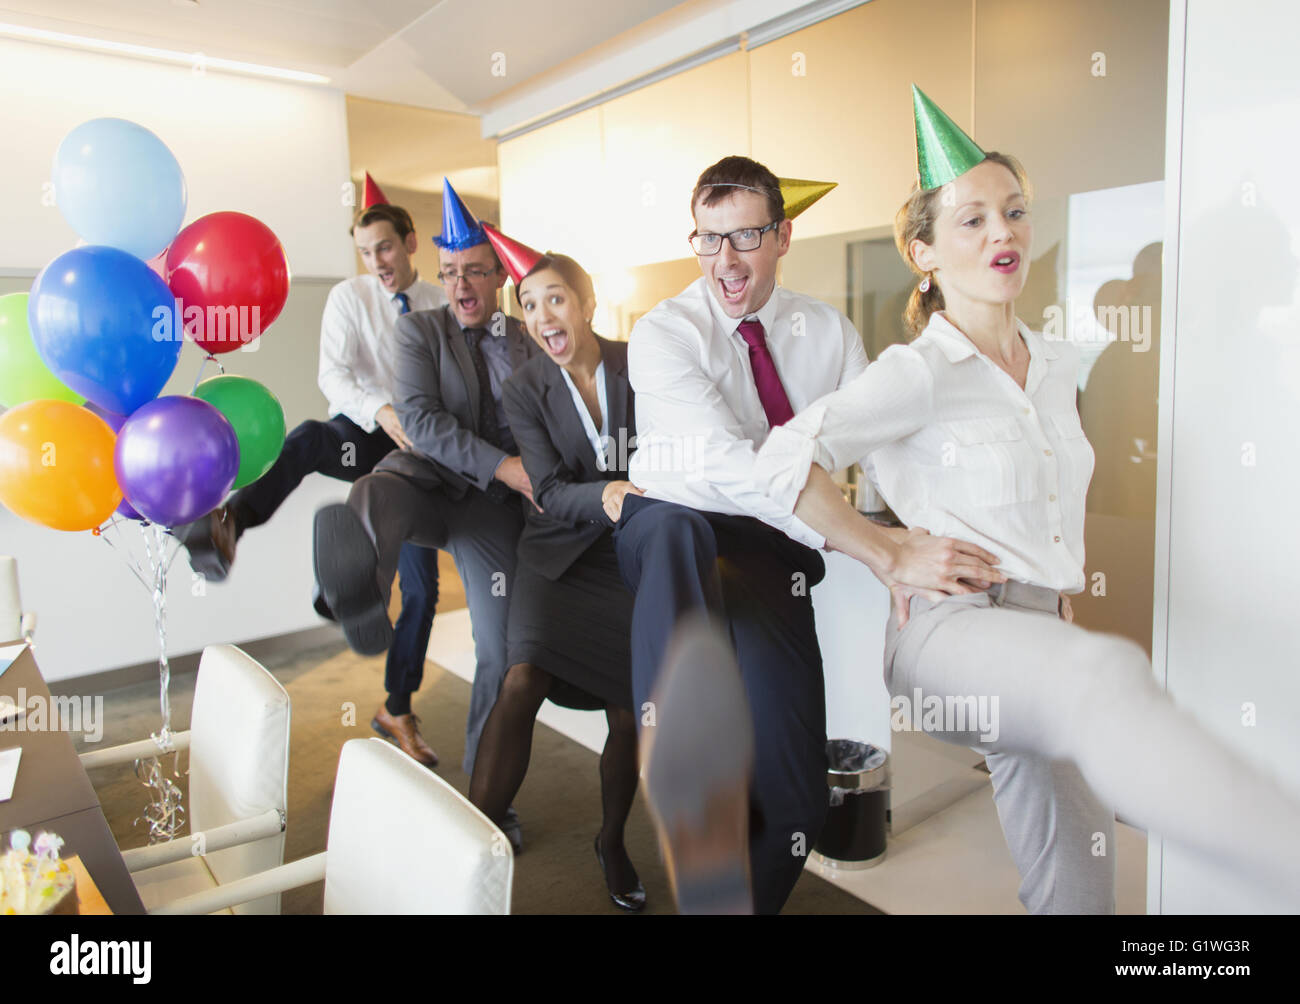 Playful business people with party hats dancing in conga line Stock Photo